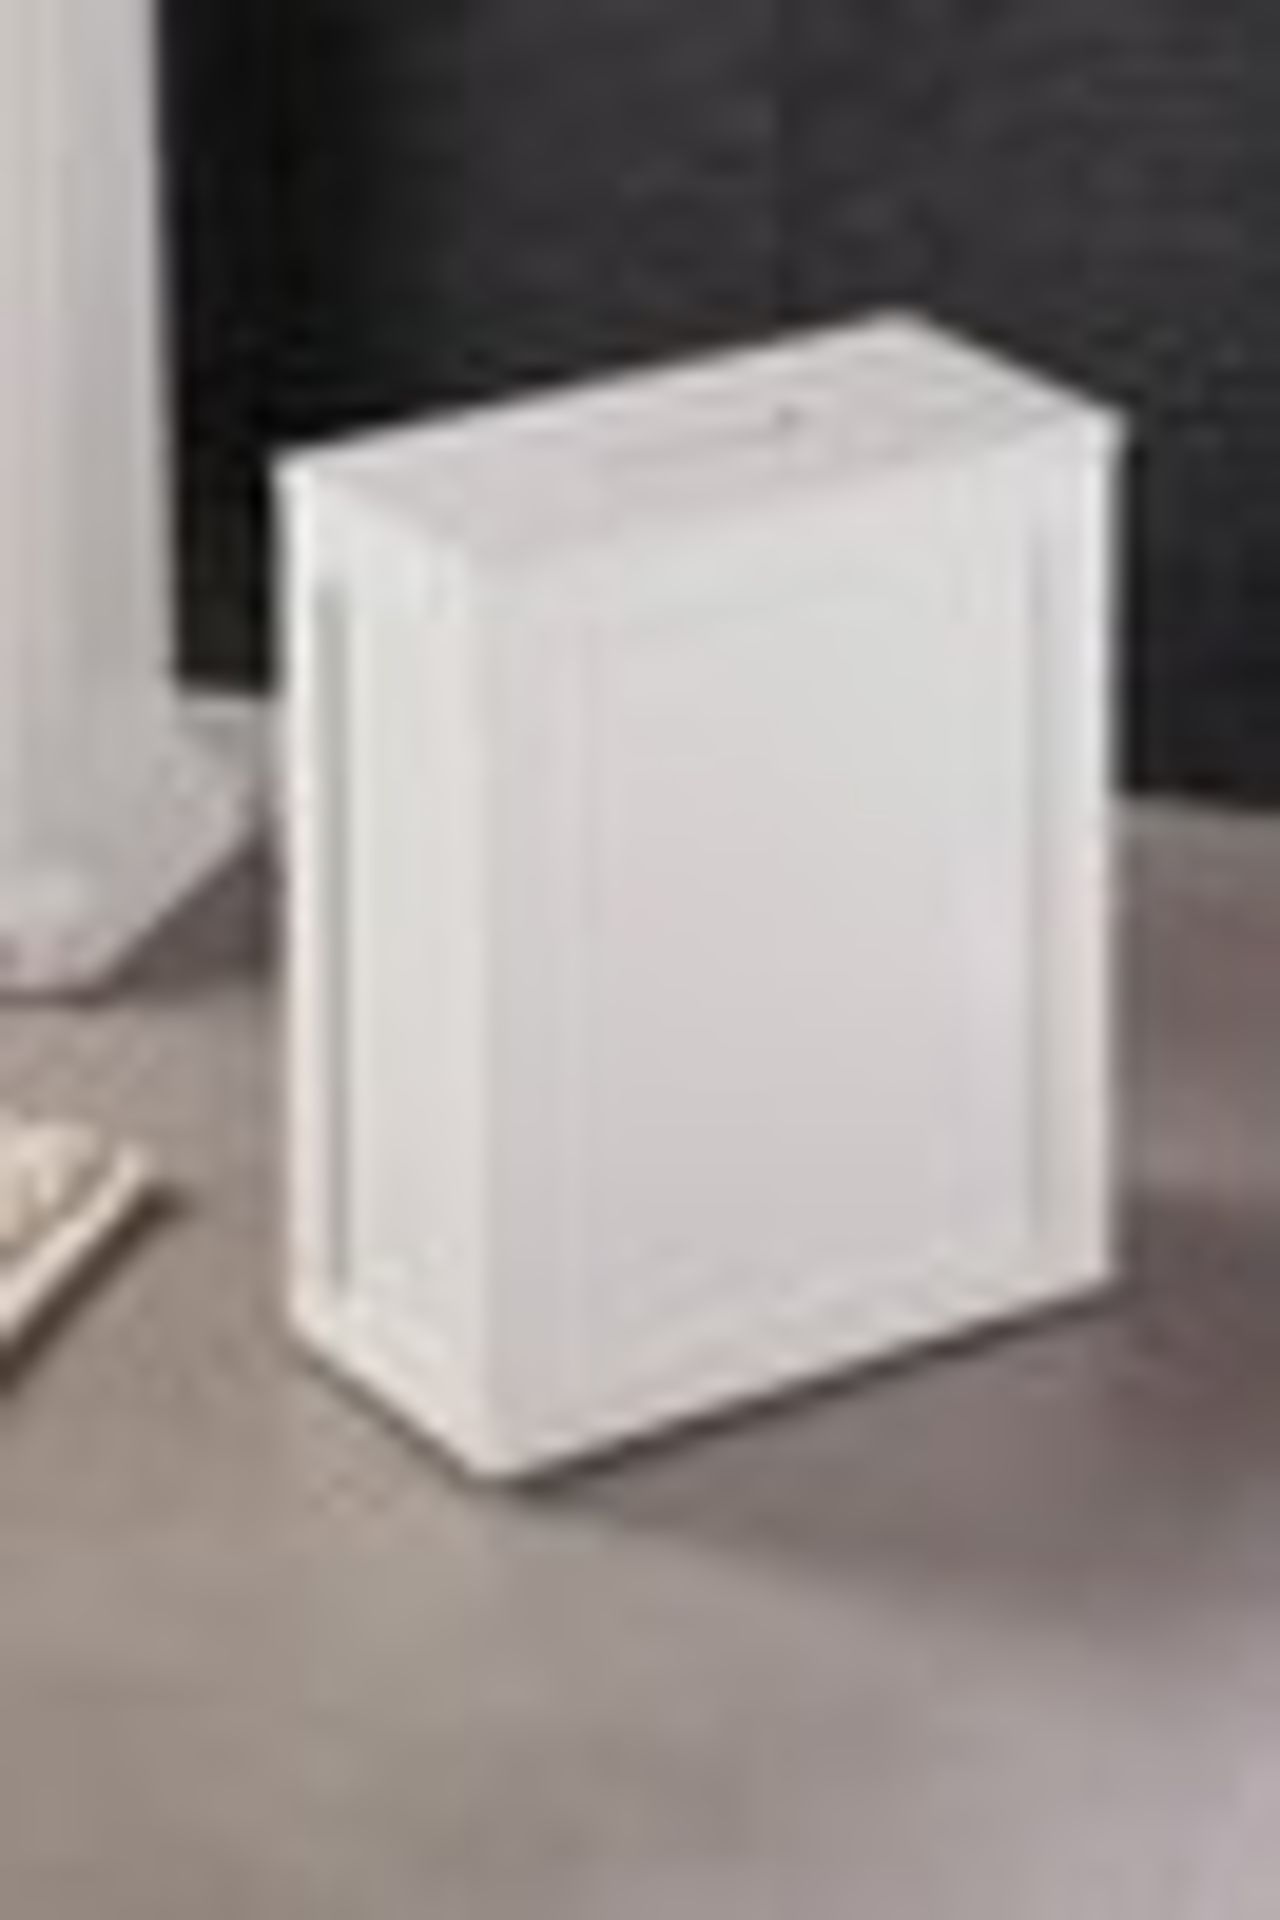 Lloyd Pascal White Gloss Bathroom Tidy RRP £35 boxed but unchecked